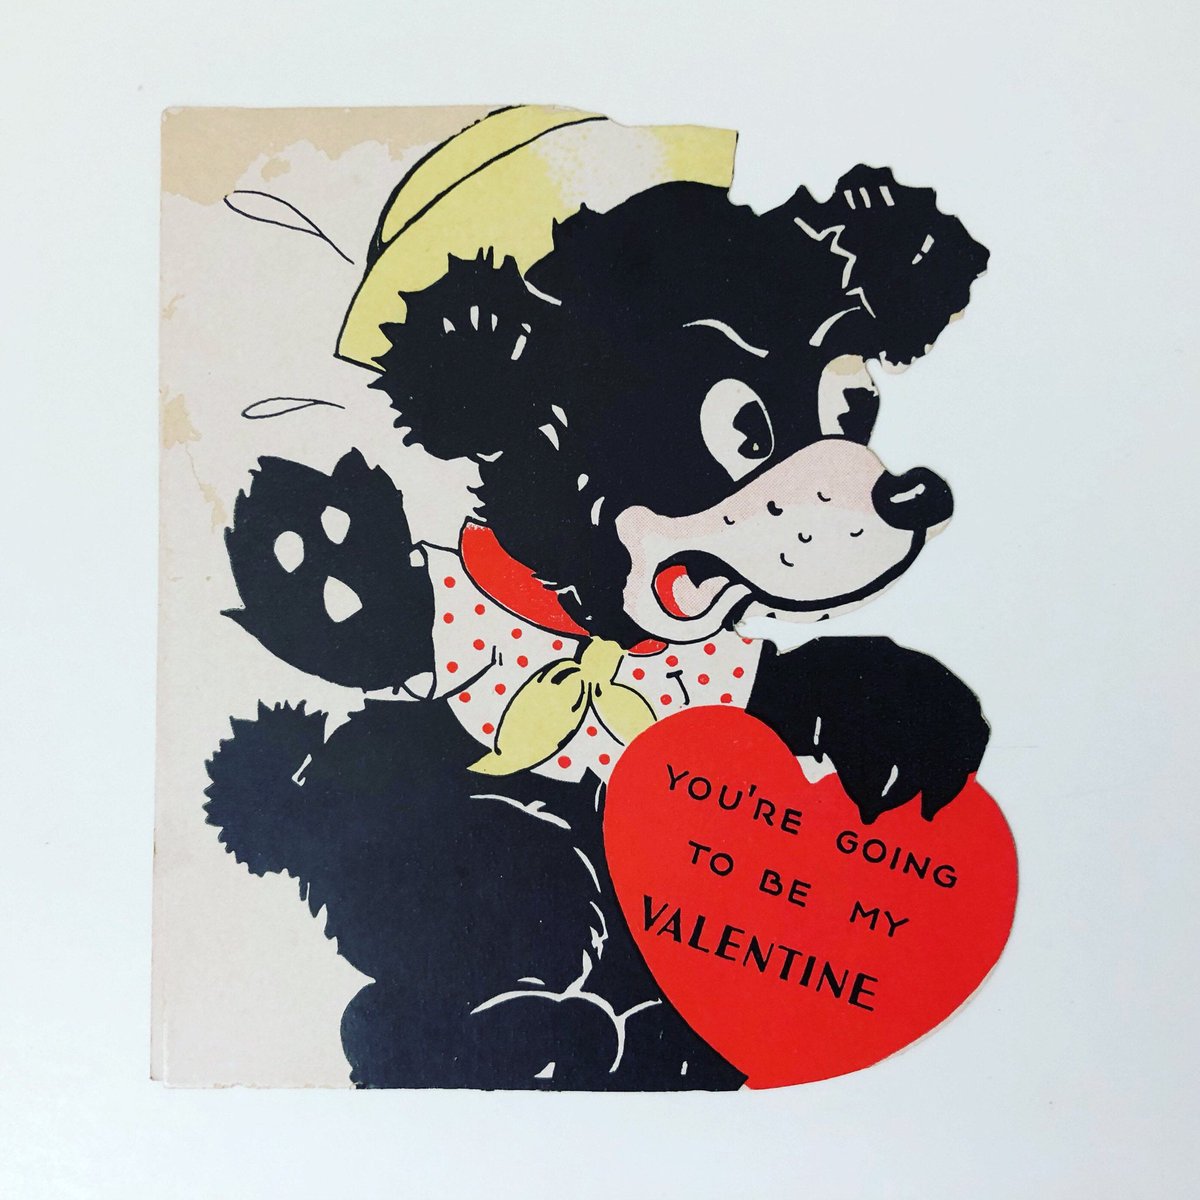 Excited to share this item from my #etsy shop: Vintage valentines Day Card - Funny dog valentine #papergoods #funnyvalentinesday #valentinedaycard #antiquevalentine #diecutvalentine #retrovalentines #printedvalentine #retrovalentine #childrenvalentine etsy.me/37bNvrI